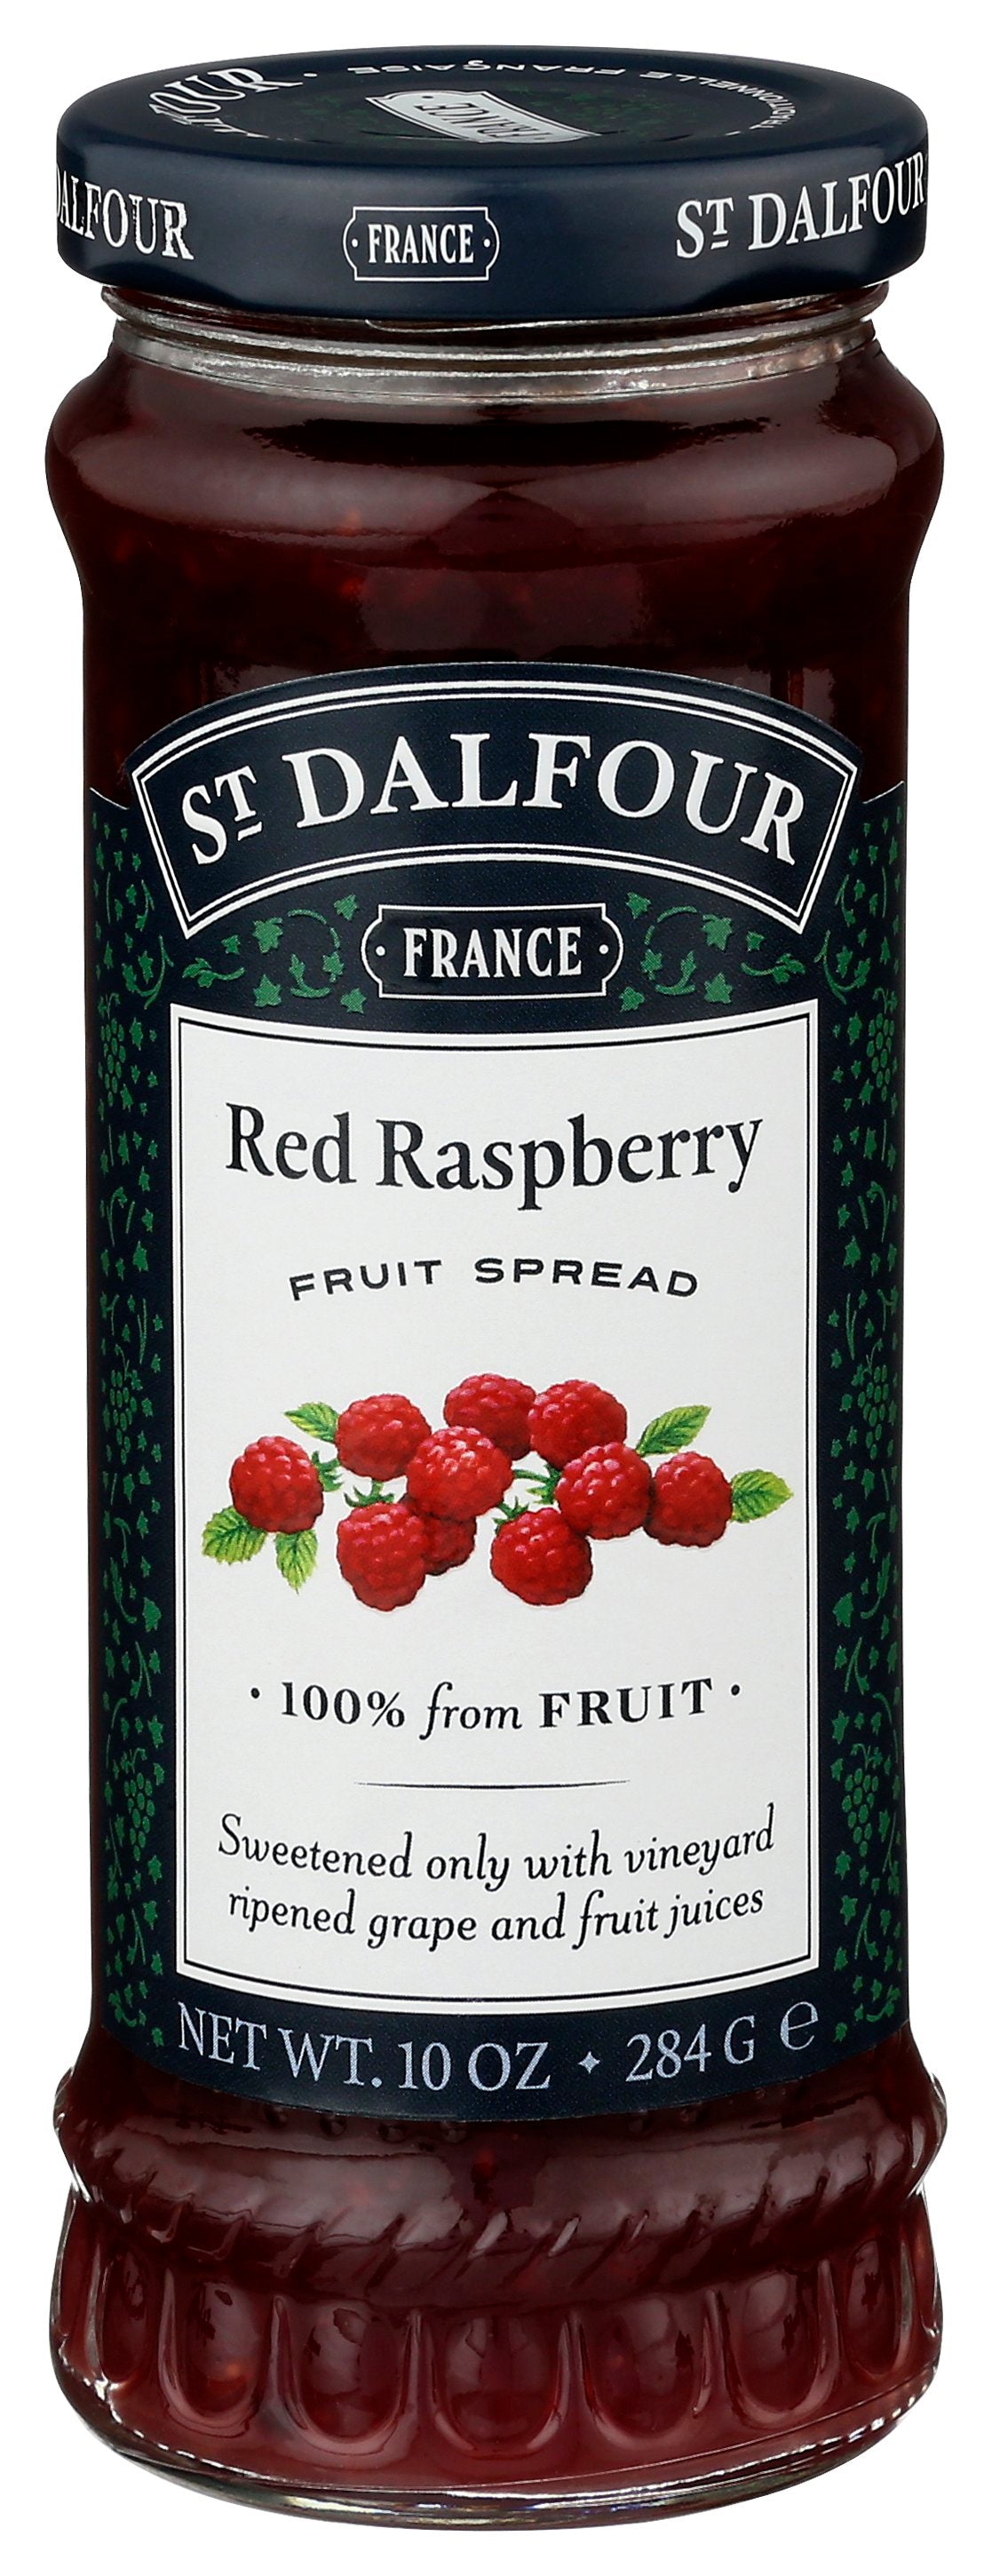 ST DALFOUR CONSERVE RED RSPBRY - Case of 6